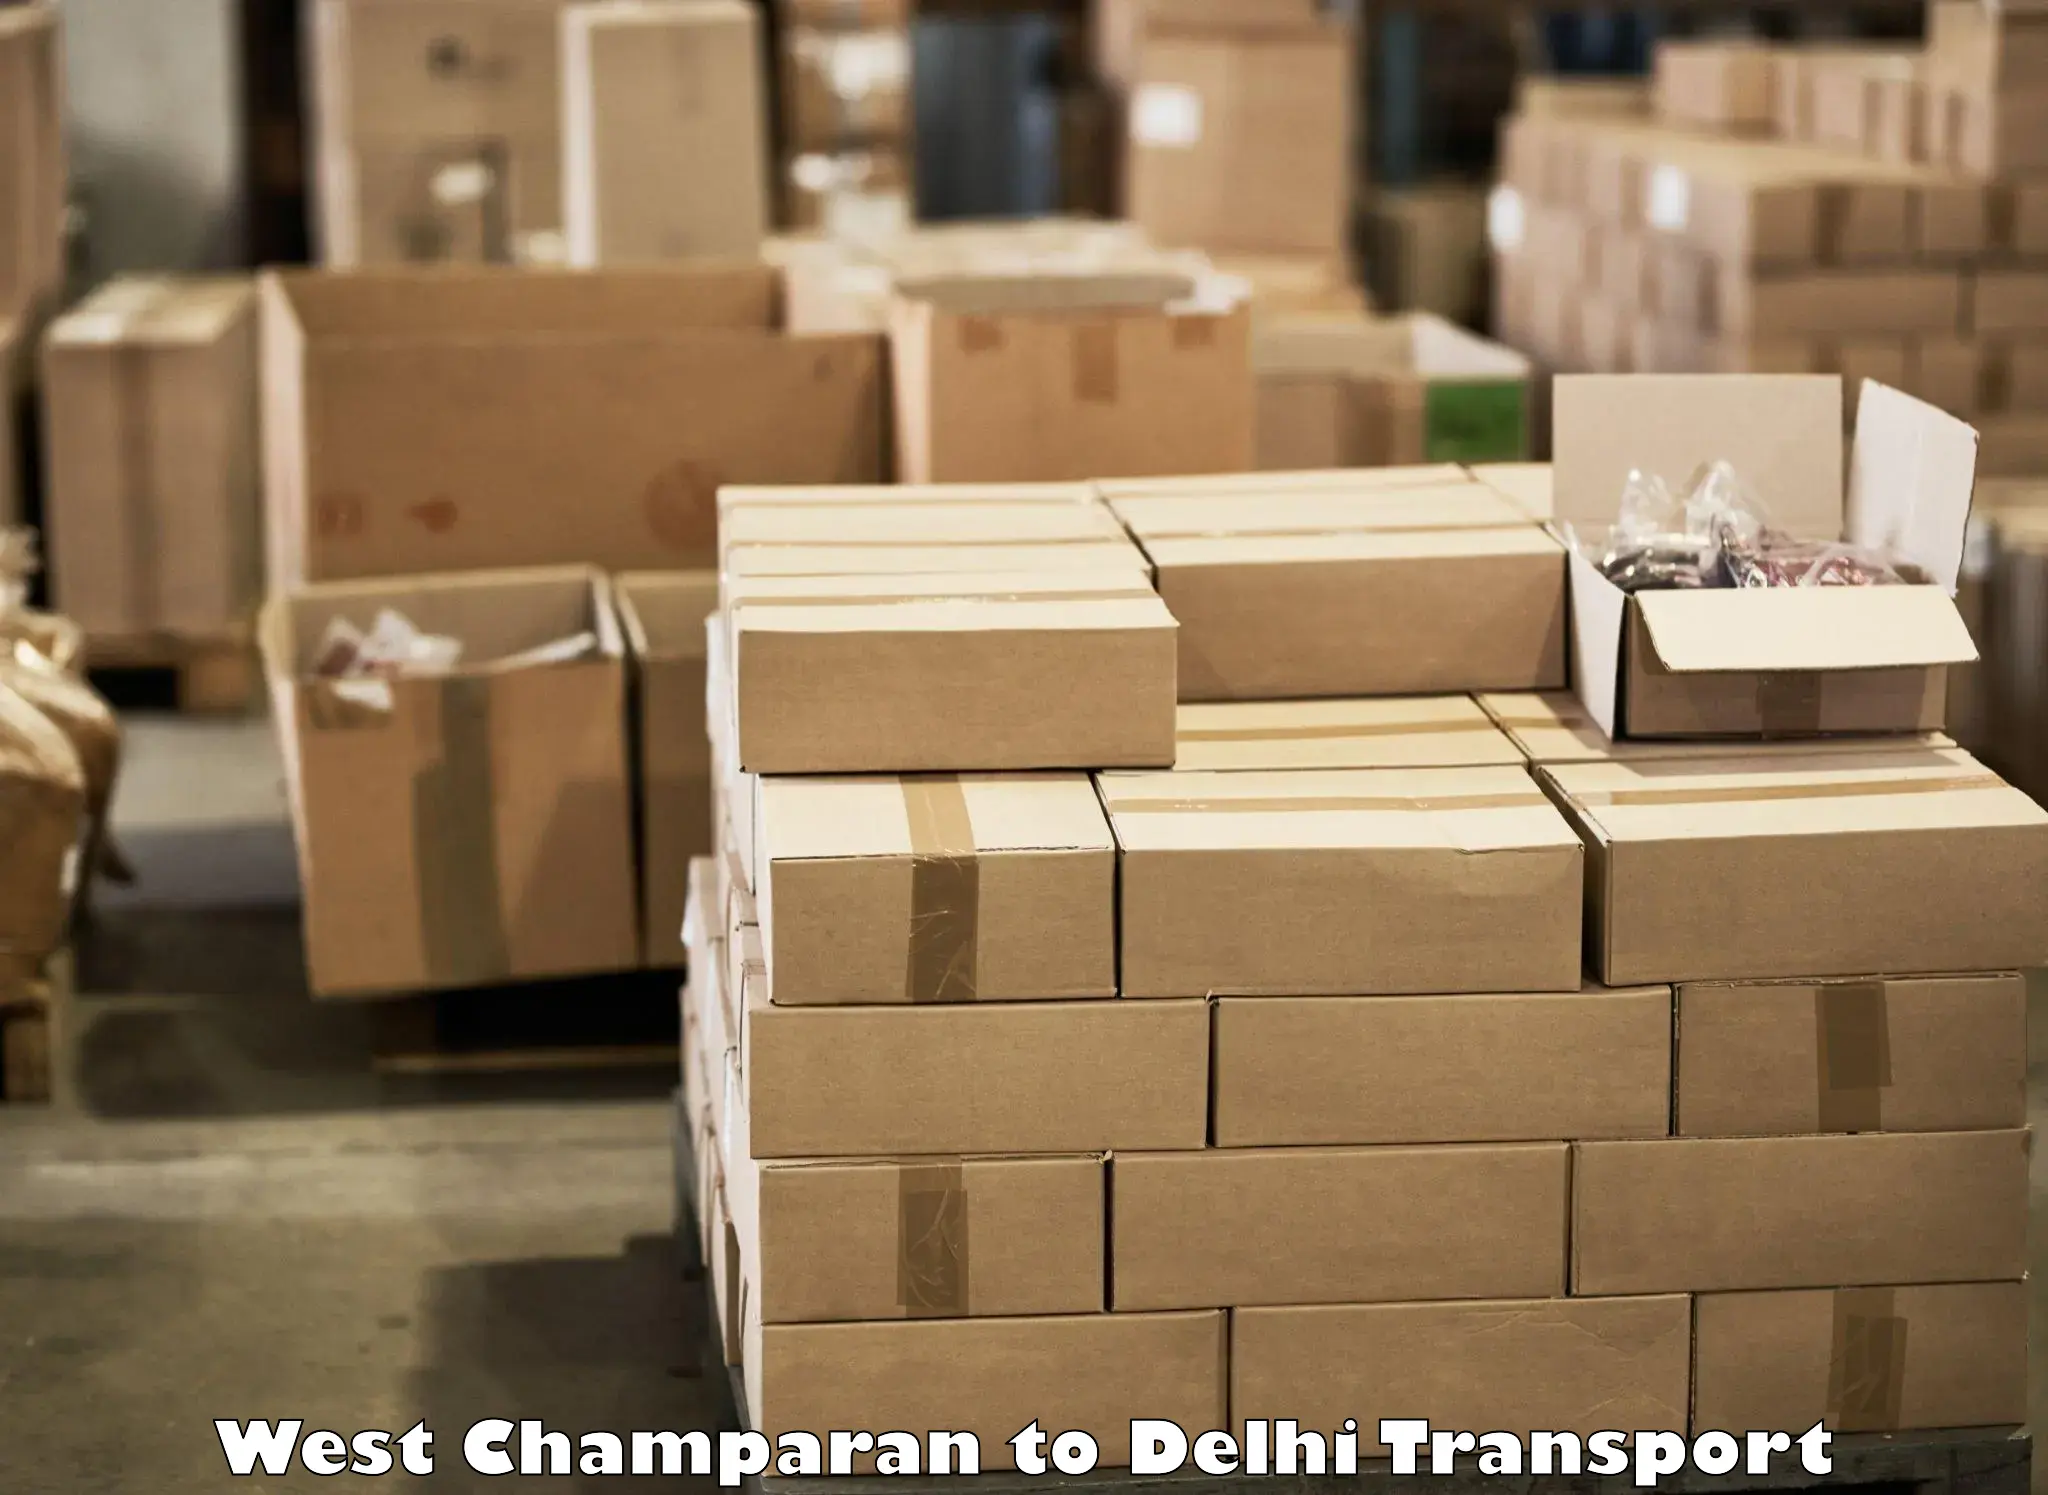 Bike transport service West Champaran to NCR